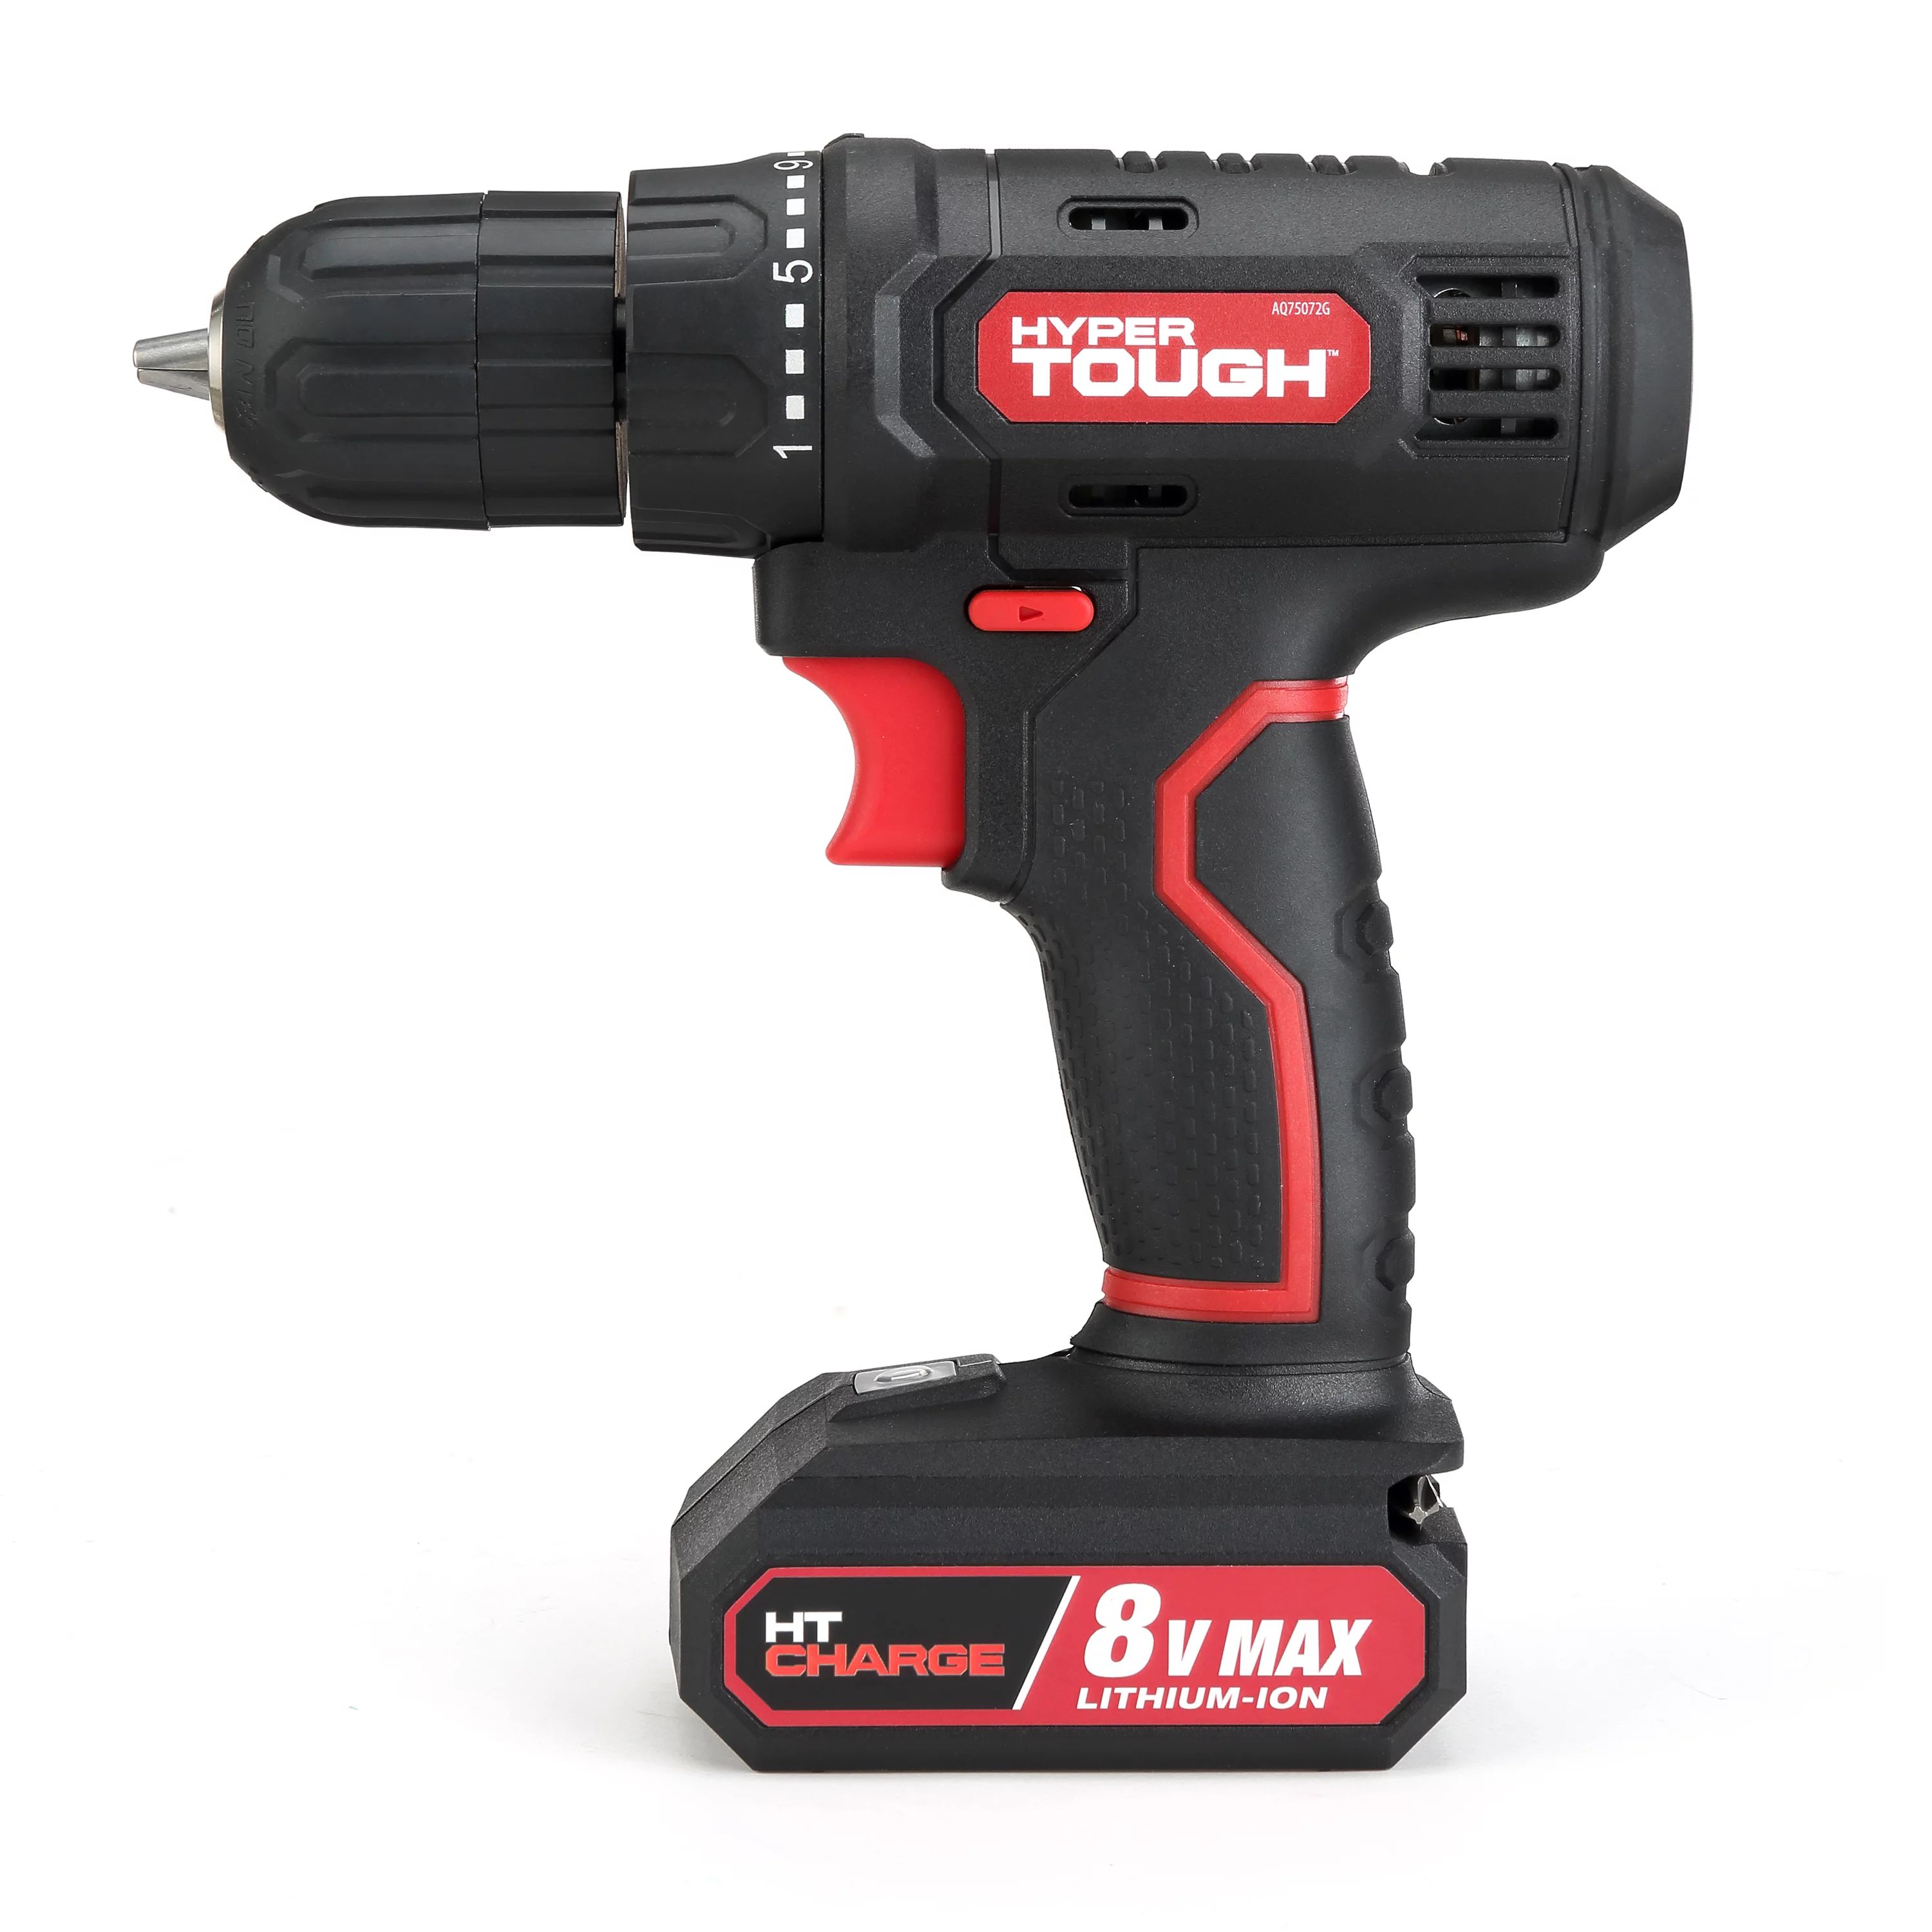 Hyper Tough 8V Max Cordless Drill, 3/8 inch Chuck, Non-Removable 1.5Ah Battery with Charger, Bit ... | Walmart (US)